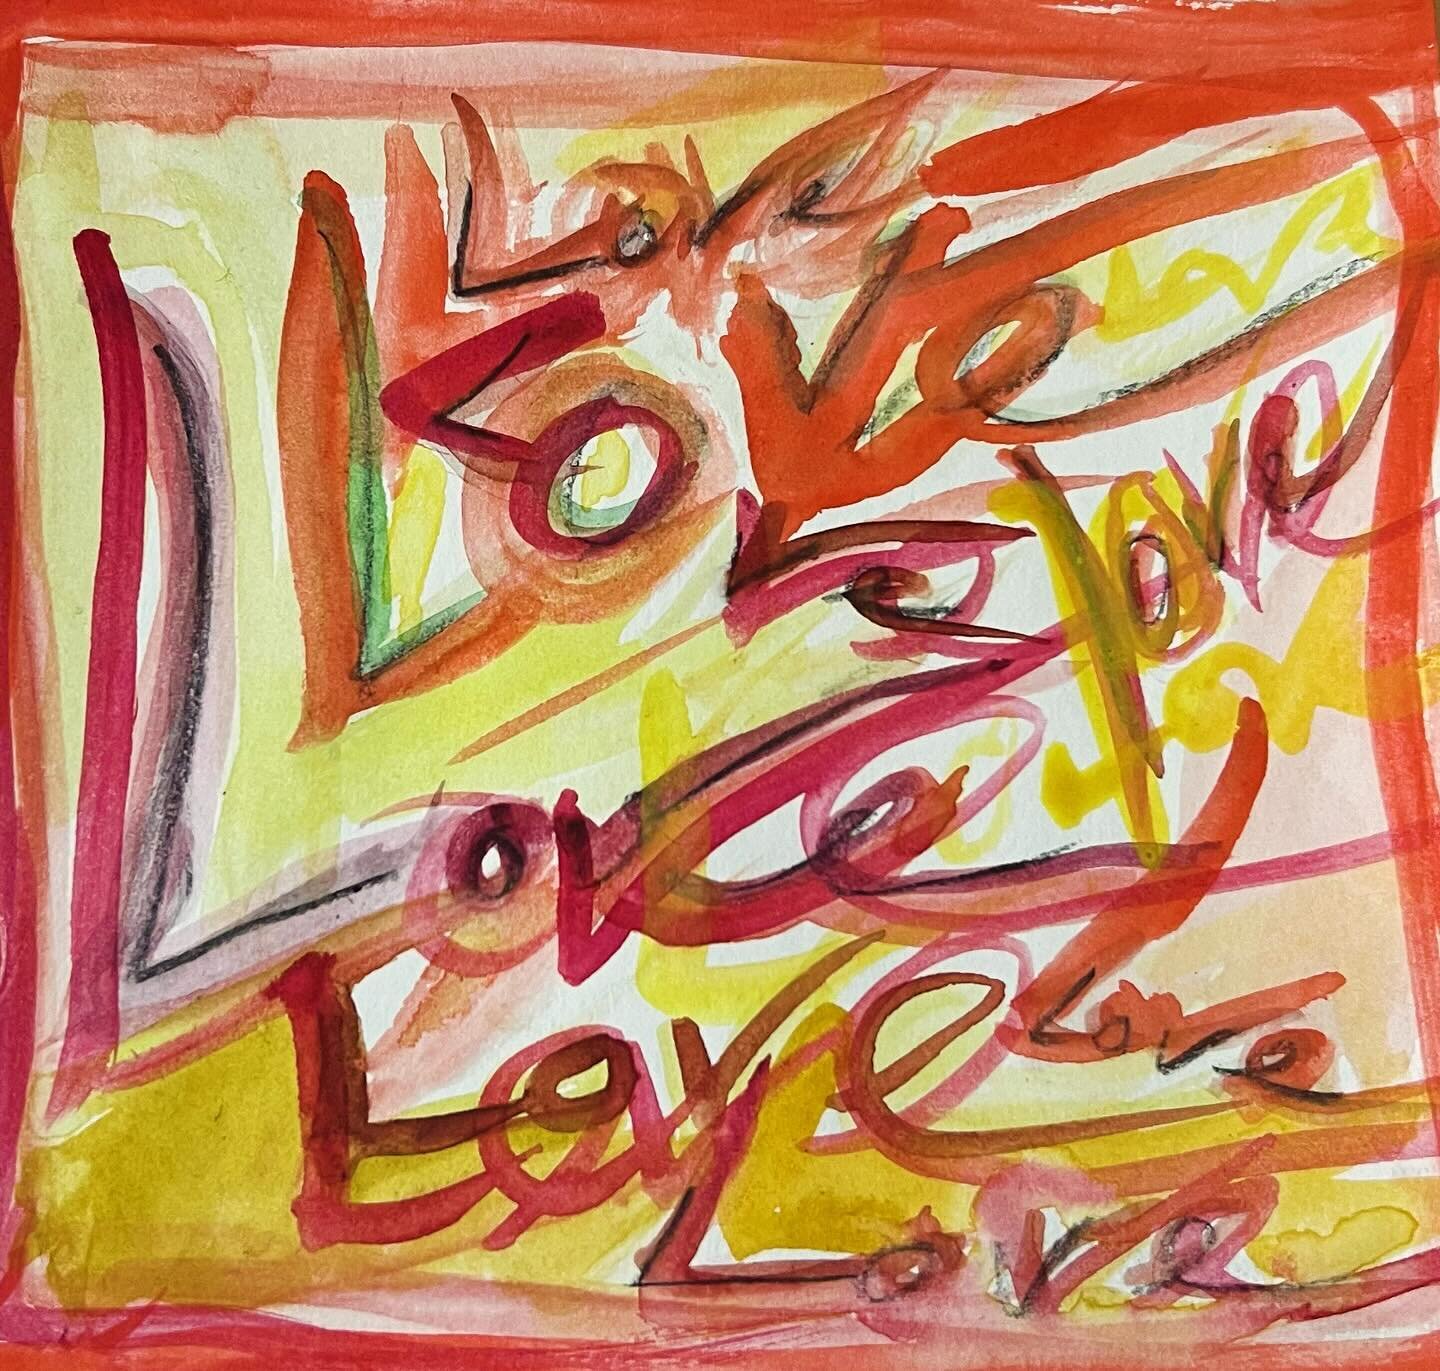 Love, Love, Love . Love each other, love all human beings, love what you do, love nature, love the planet, love your self 
Love scribbling paint by me LOVE to all.
#loveislove #loveyourself #loveall #loveyou